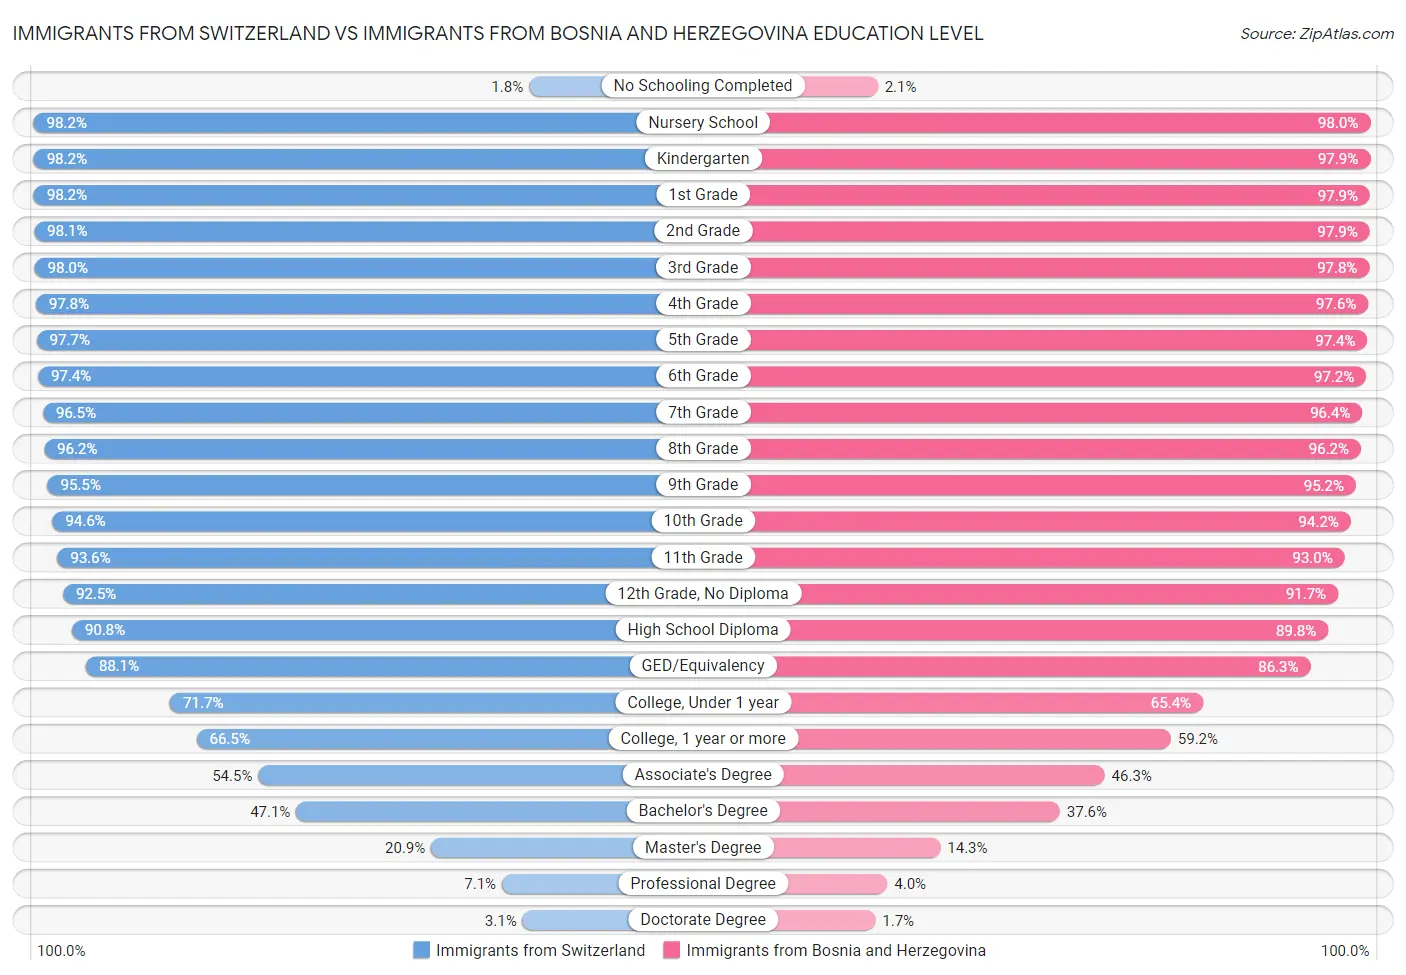 Immigrants from Switzerland vs Immigrants from Bosnia and Herzegovina Education Level